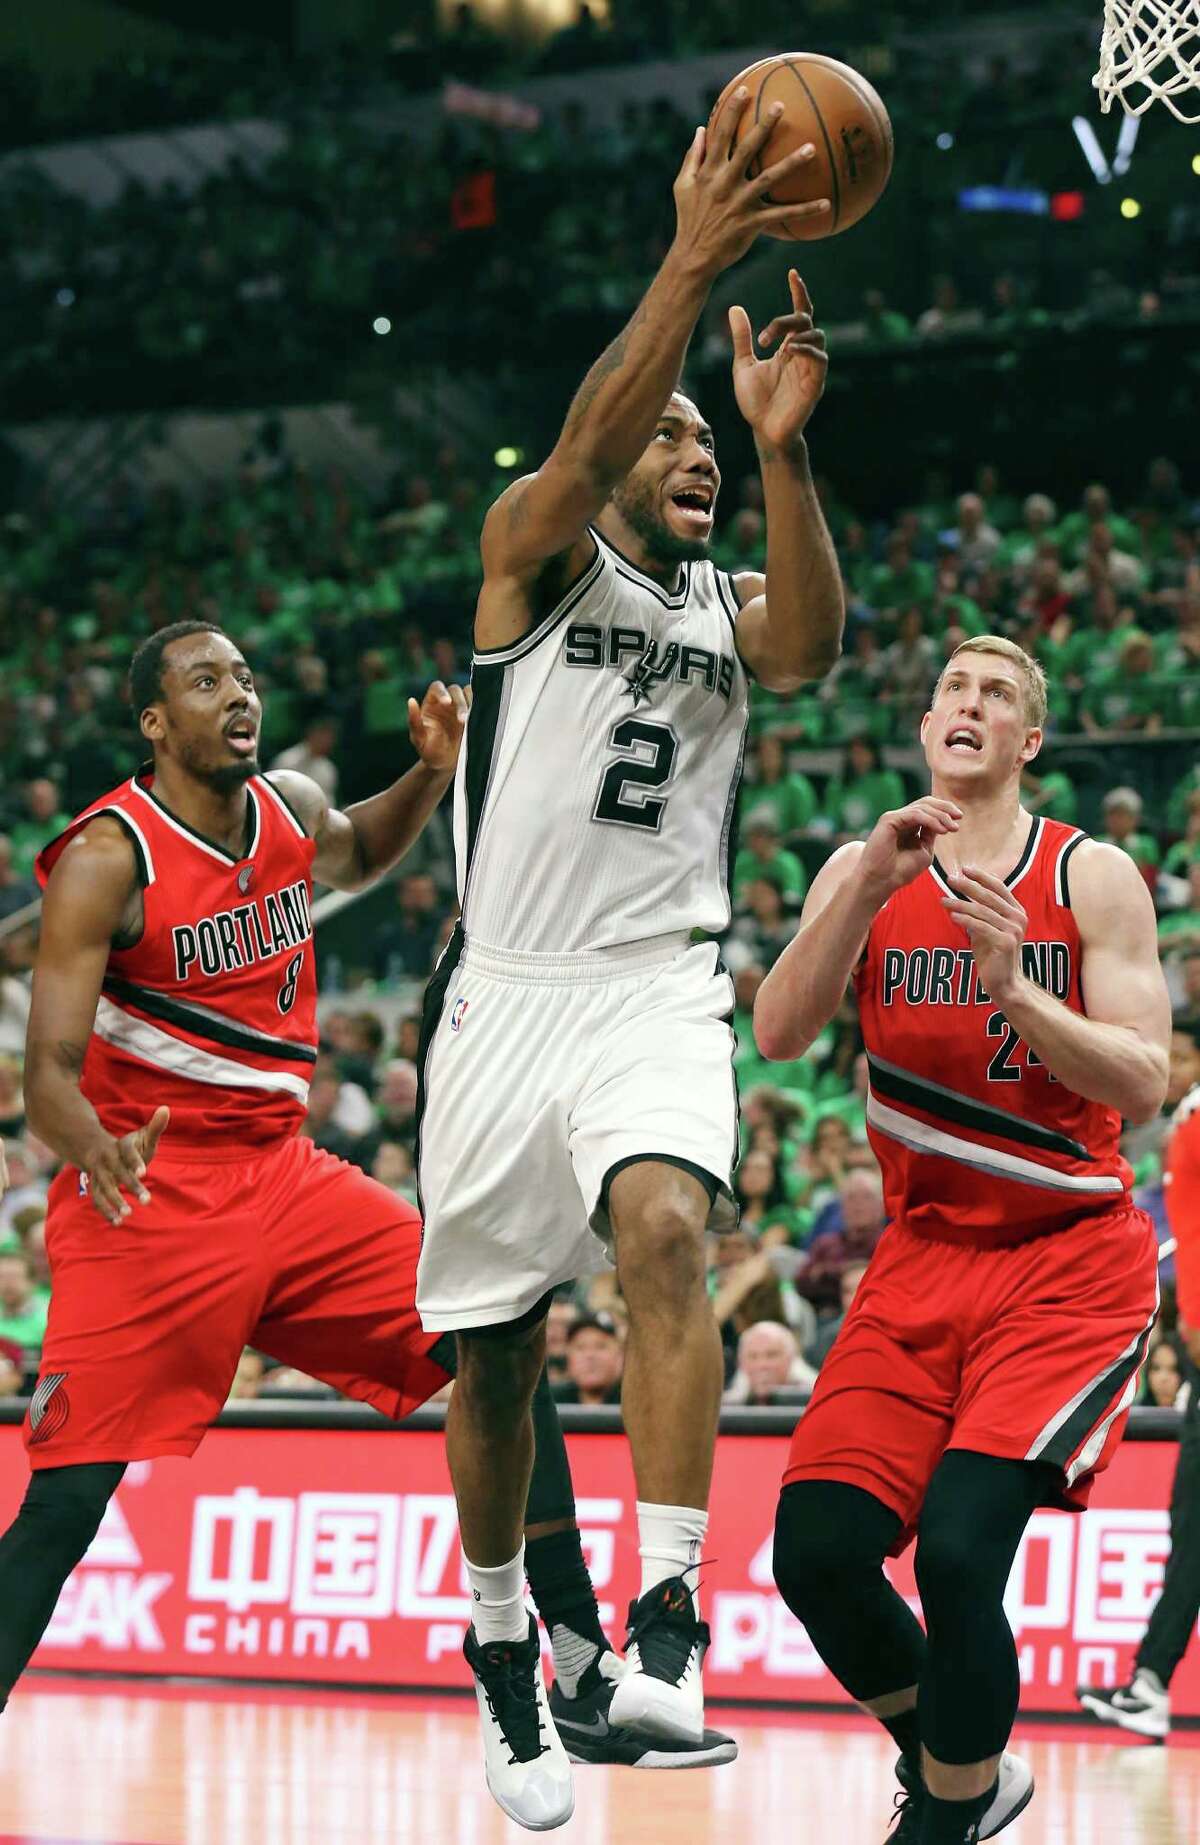 San Antonio Spurs' Kawhi Leonard shoots between Portland Trail Blazers' Al-Farouq Aminu (left) and Mason Plumlee during second half action Thursday March 17, 2016 at the AT&T Center. The Spurs won 118-110.